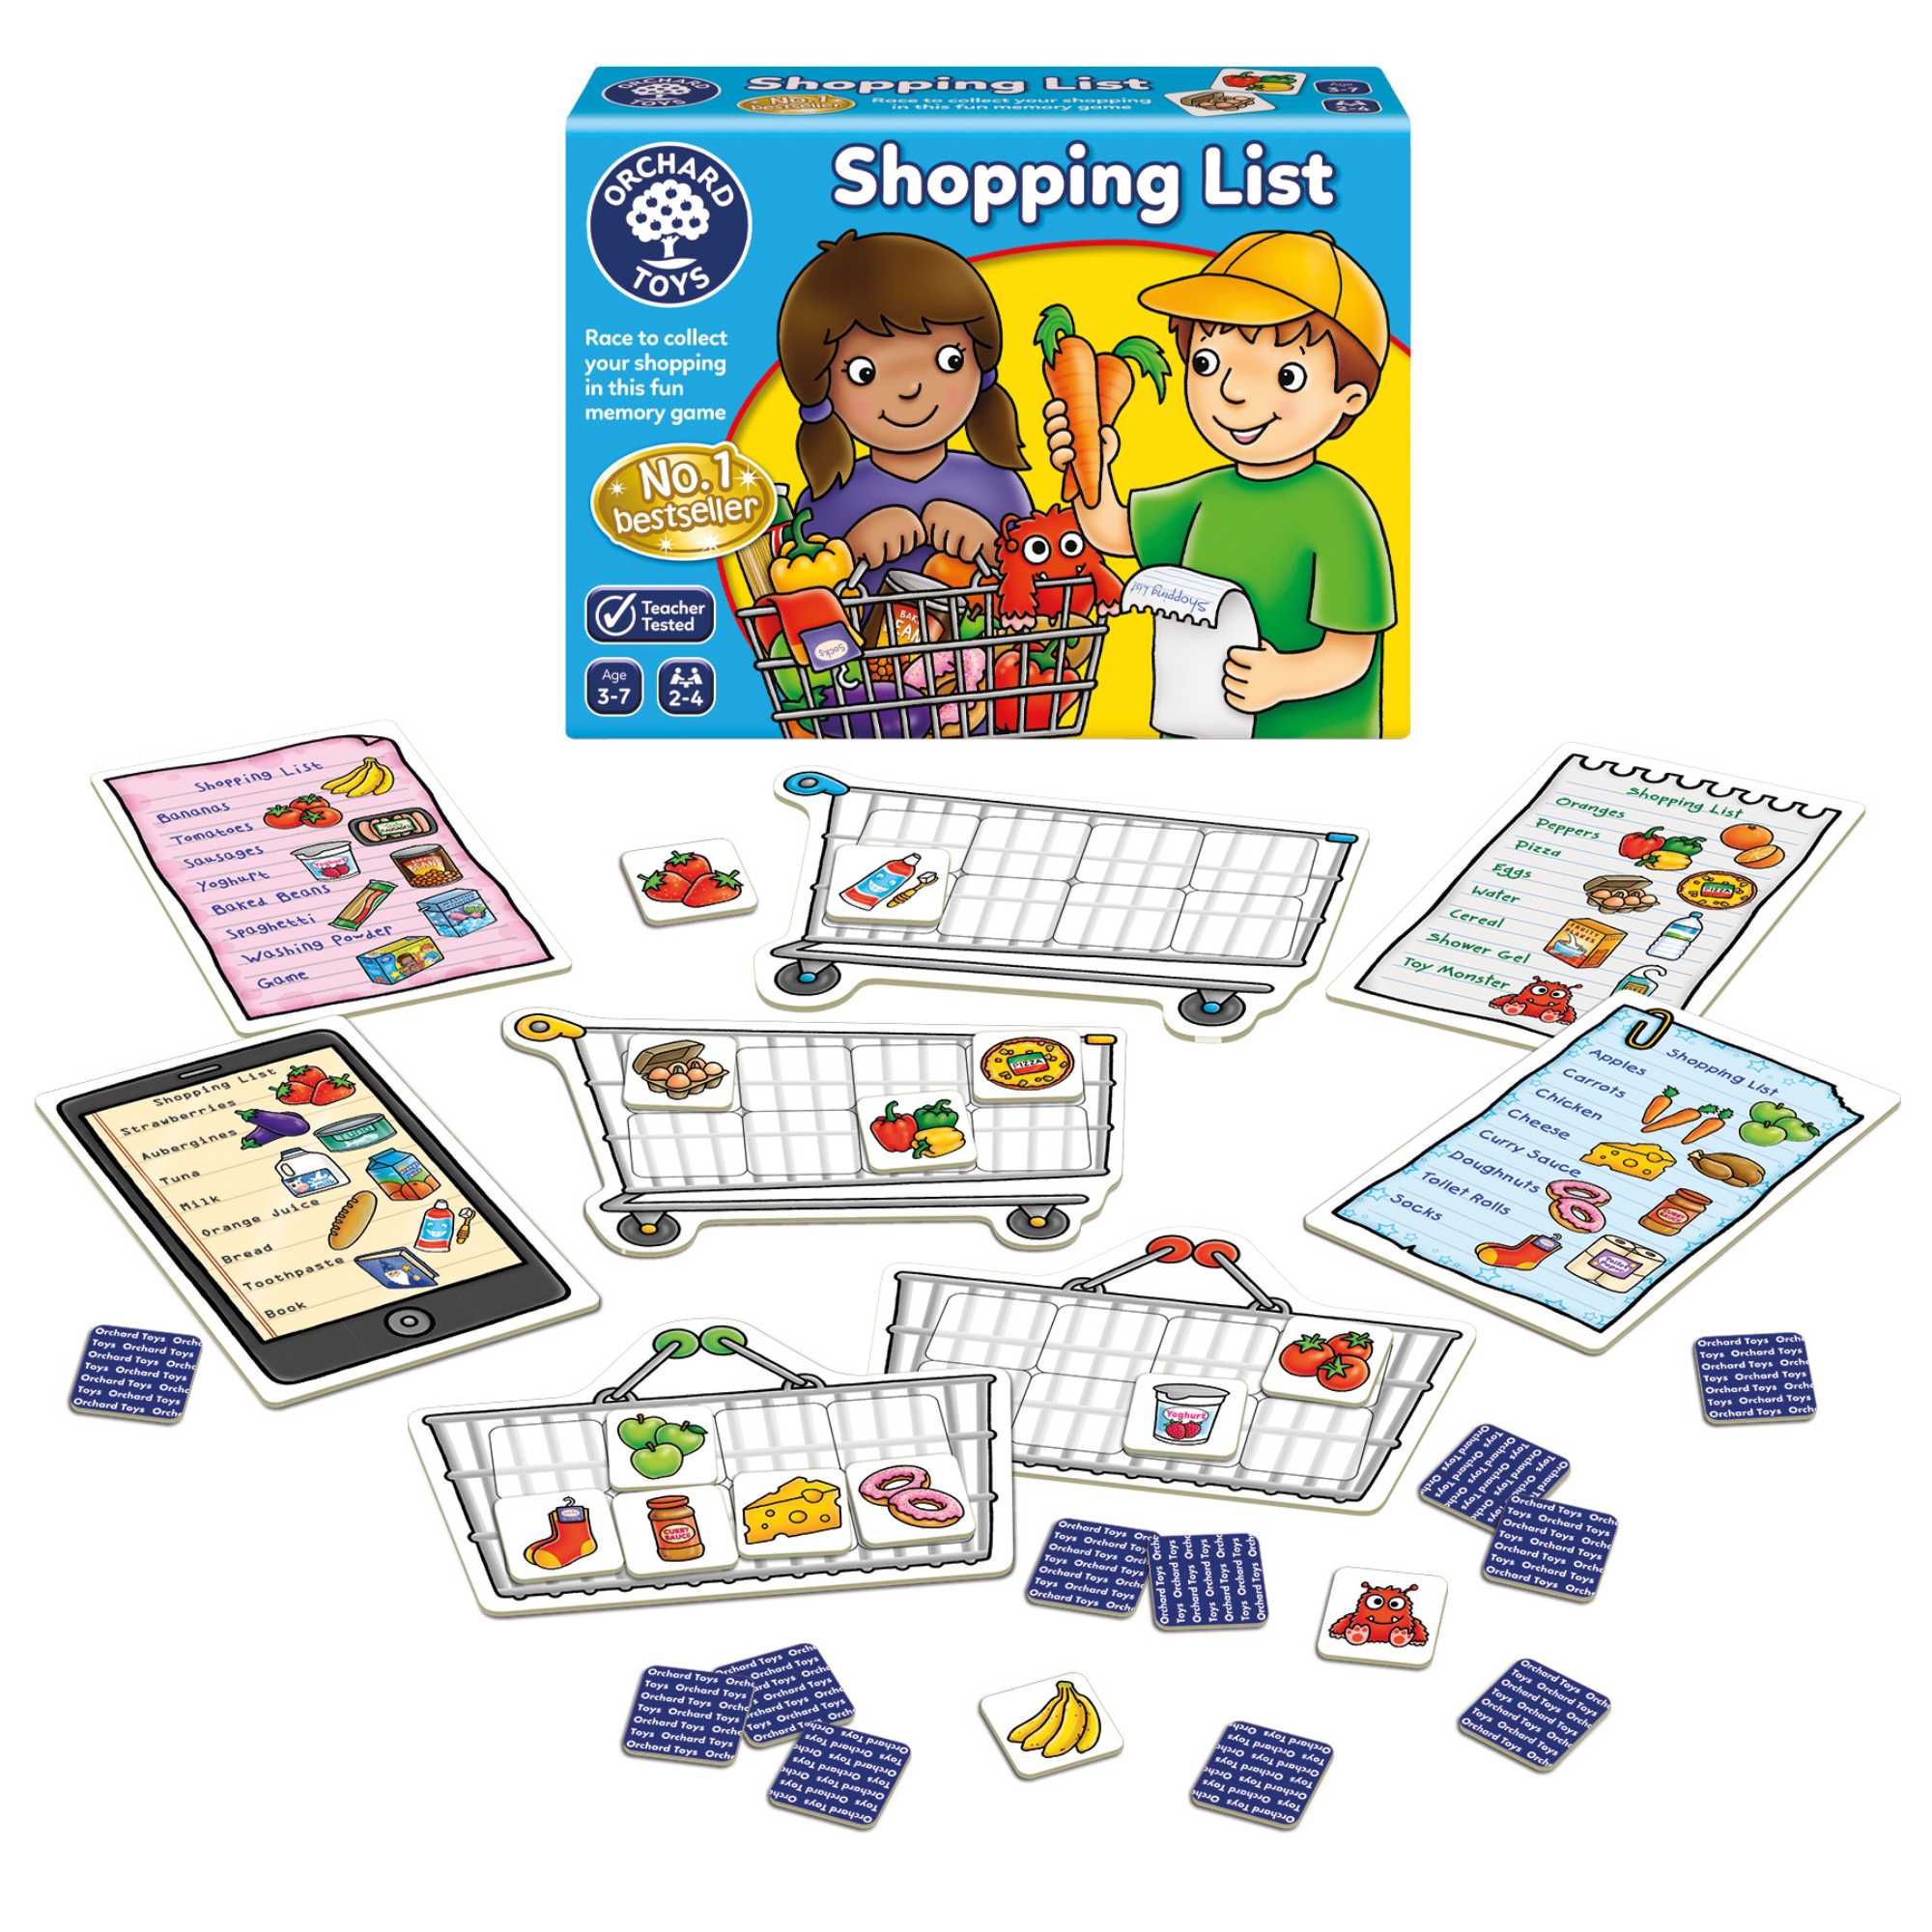 Orchards Shopping List Childrens Card Game